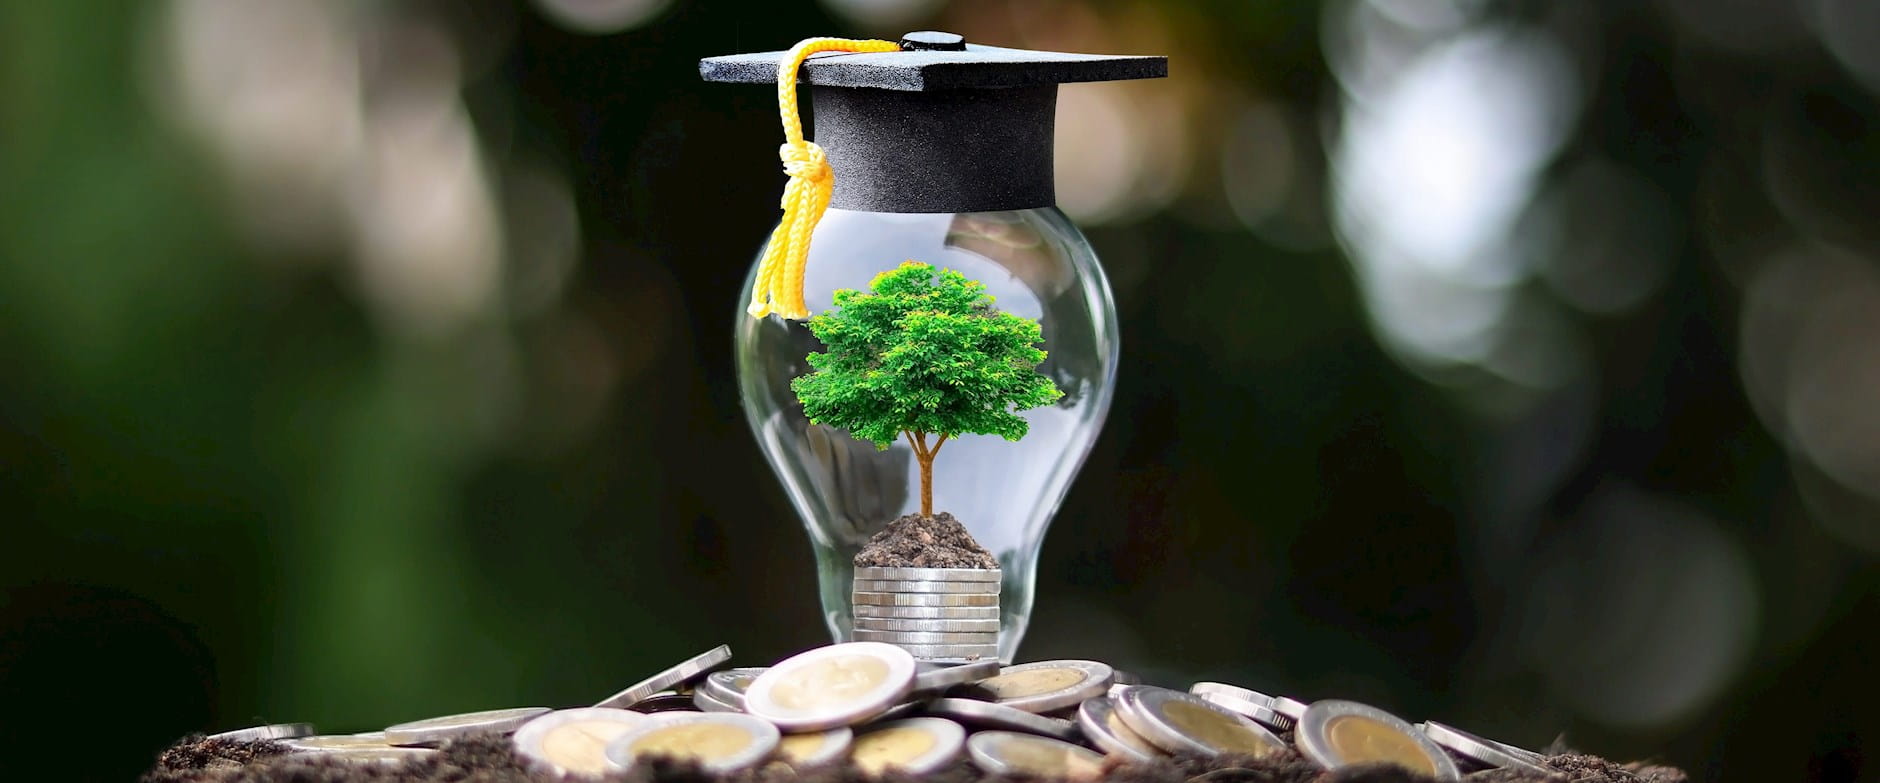 A very green tree grows inside a lightbulb atop a pile of coins; the lightbulb is topped with a graduation cap